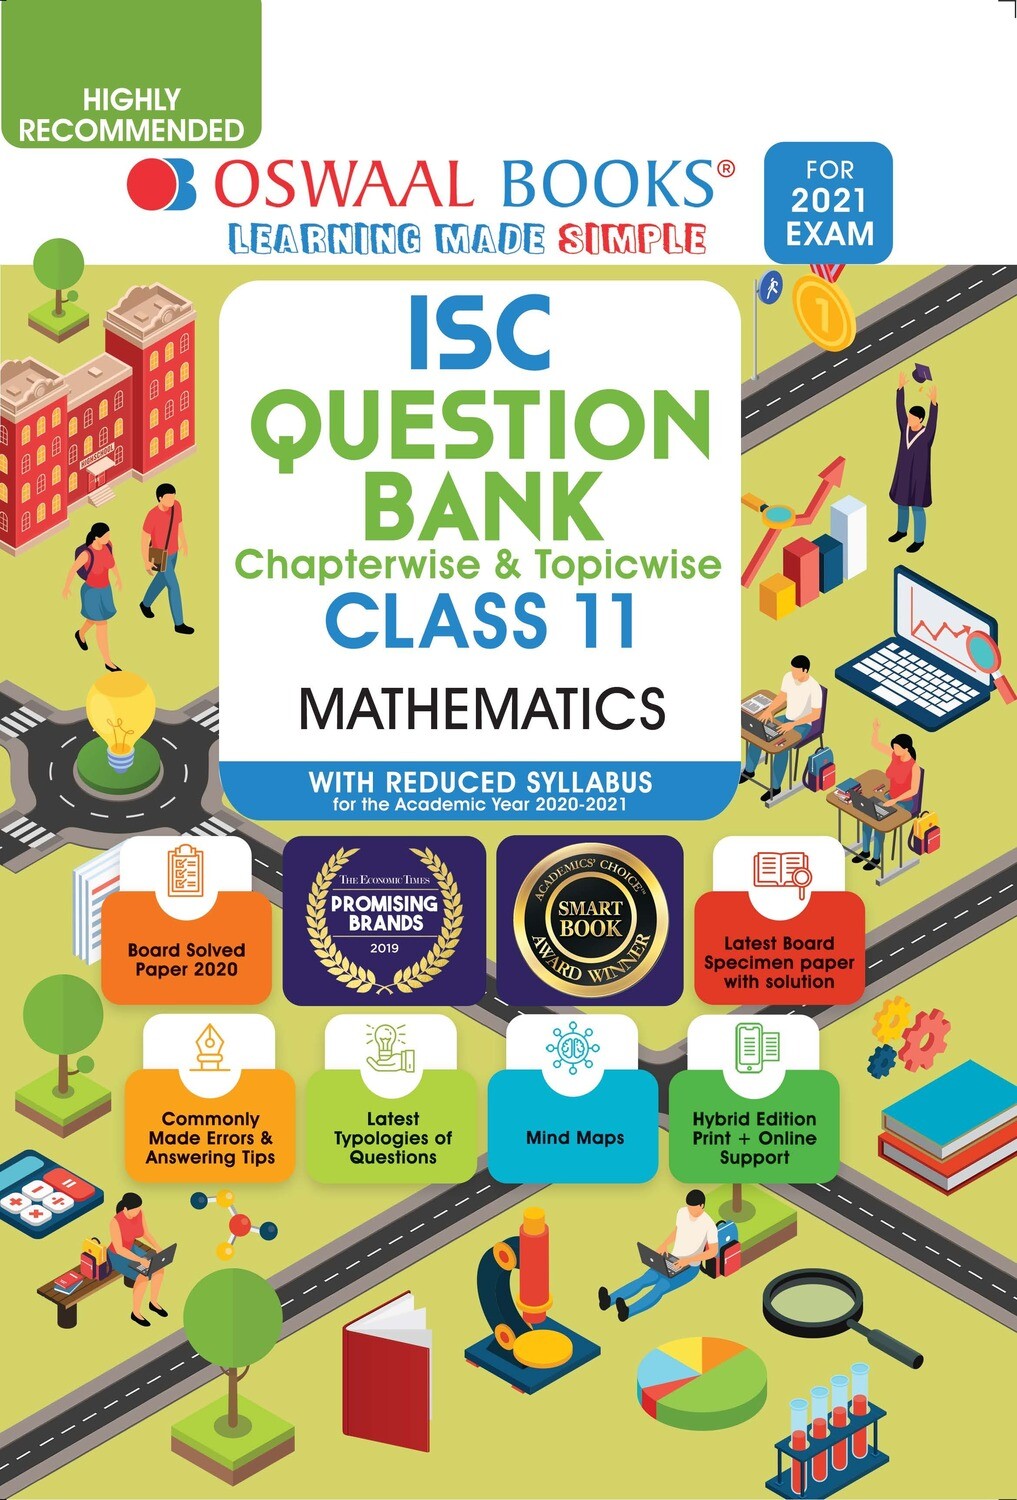 Buy e-book: Oswaal ISC Question Banks Class 11 Mathematics (Reduced Syllabus) (For 2021 Exam)